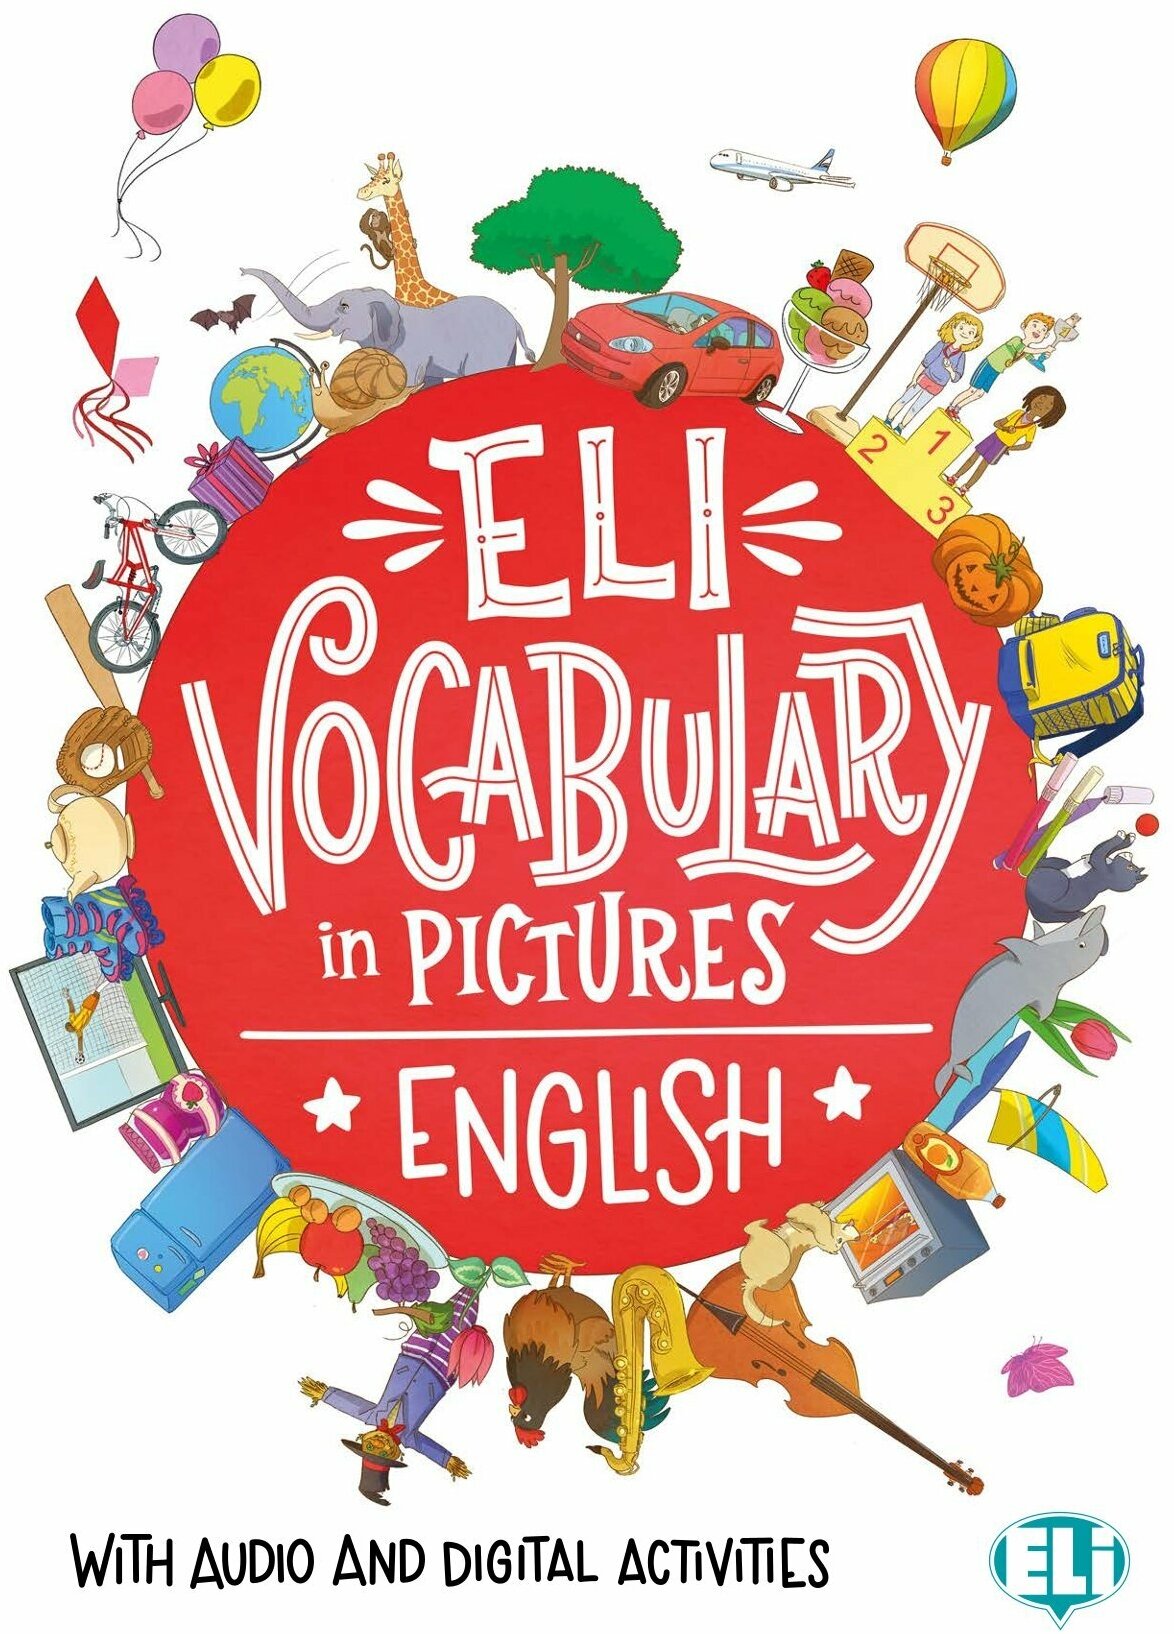 Vocabulary in pictures. English. With audio and digital activities - фото №1